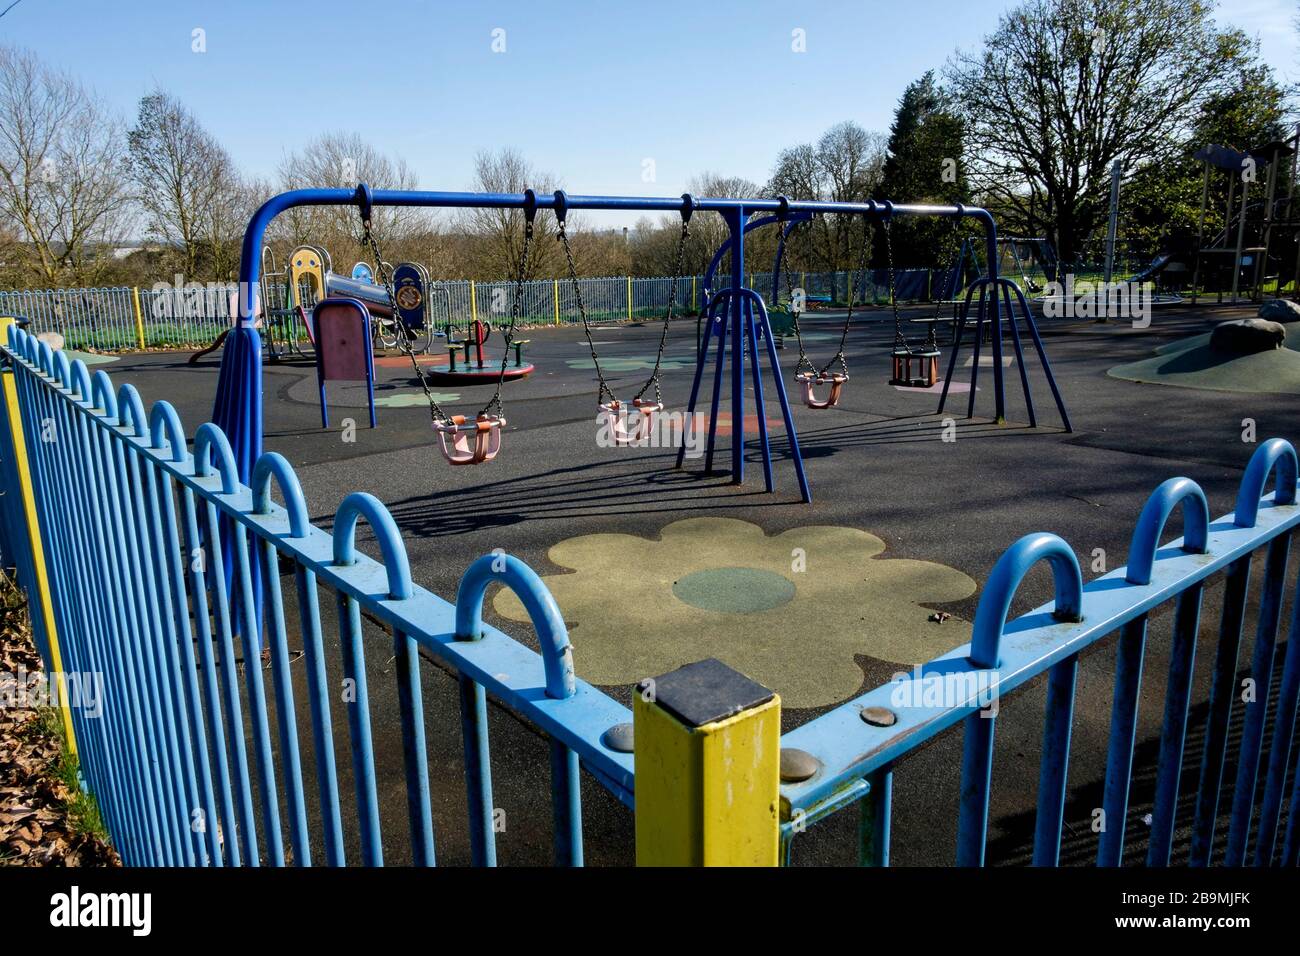 A local authority children's playground is padlocked to prevent entry under the UK Government's social distancing enforcement measures. Stock Photo